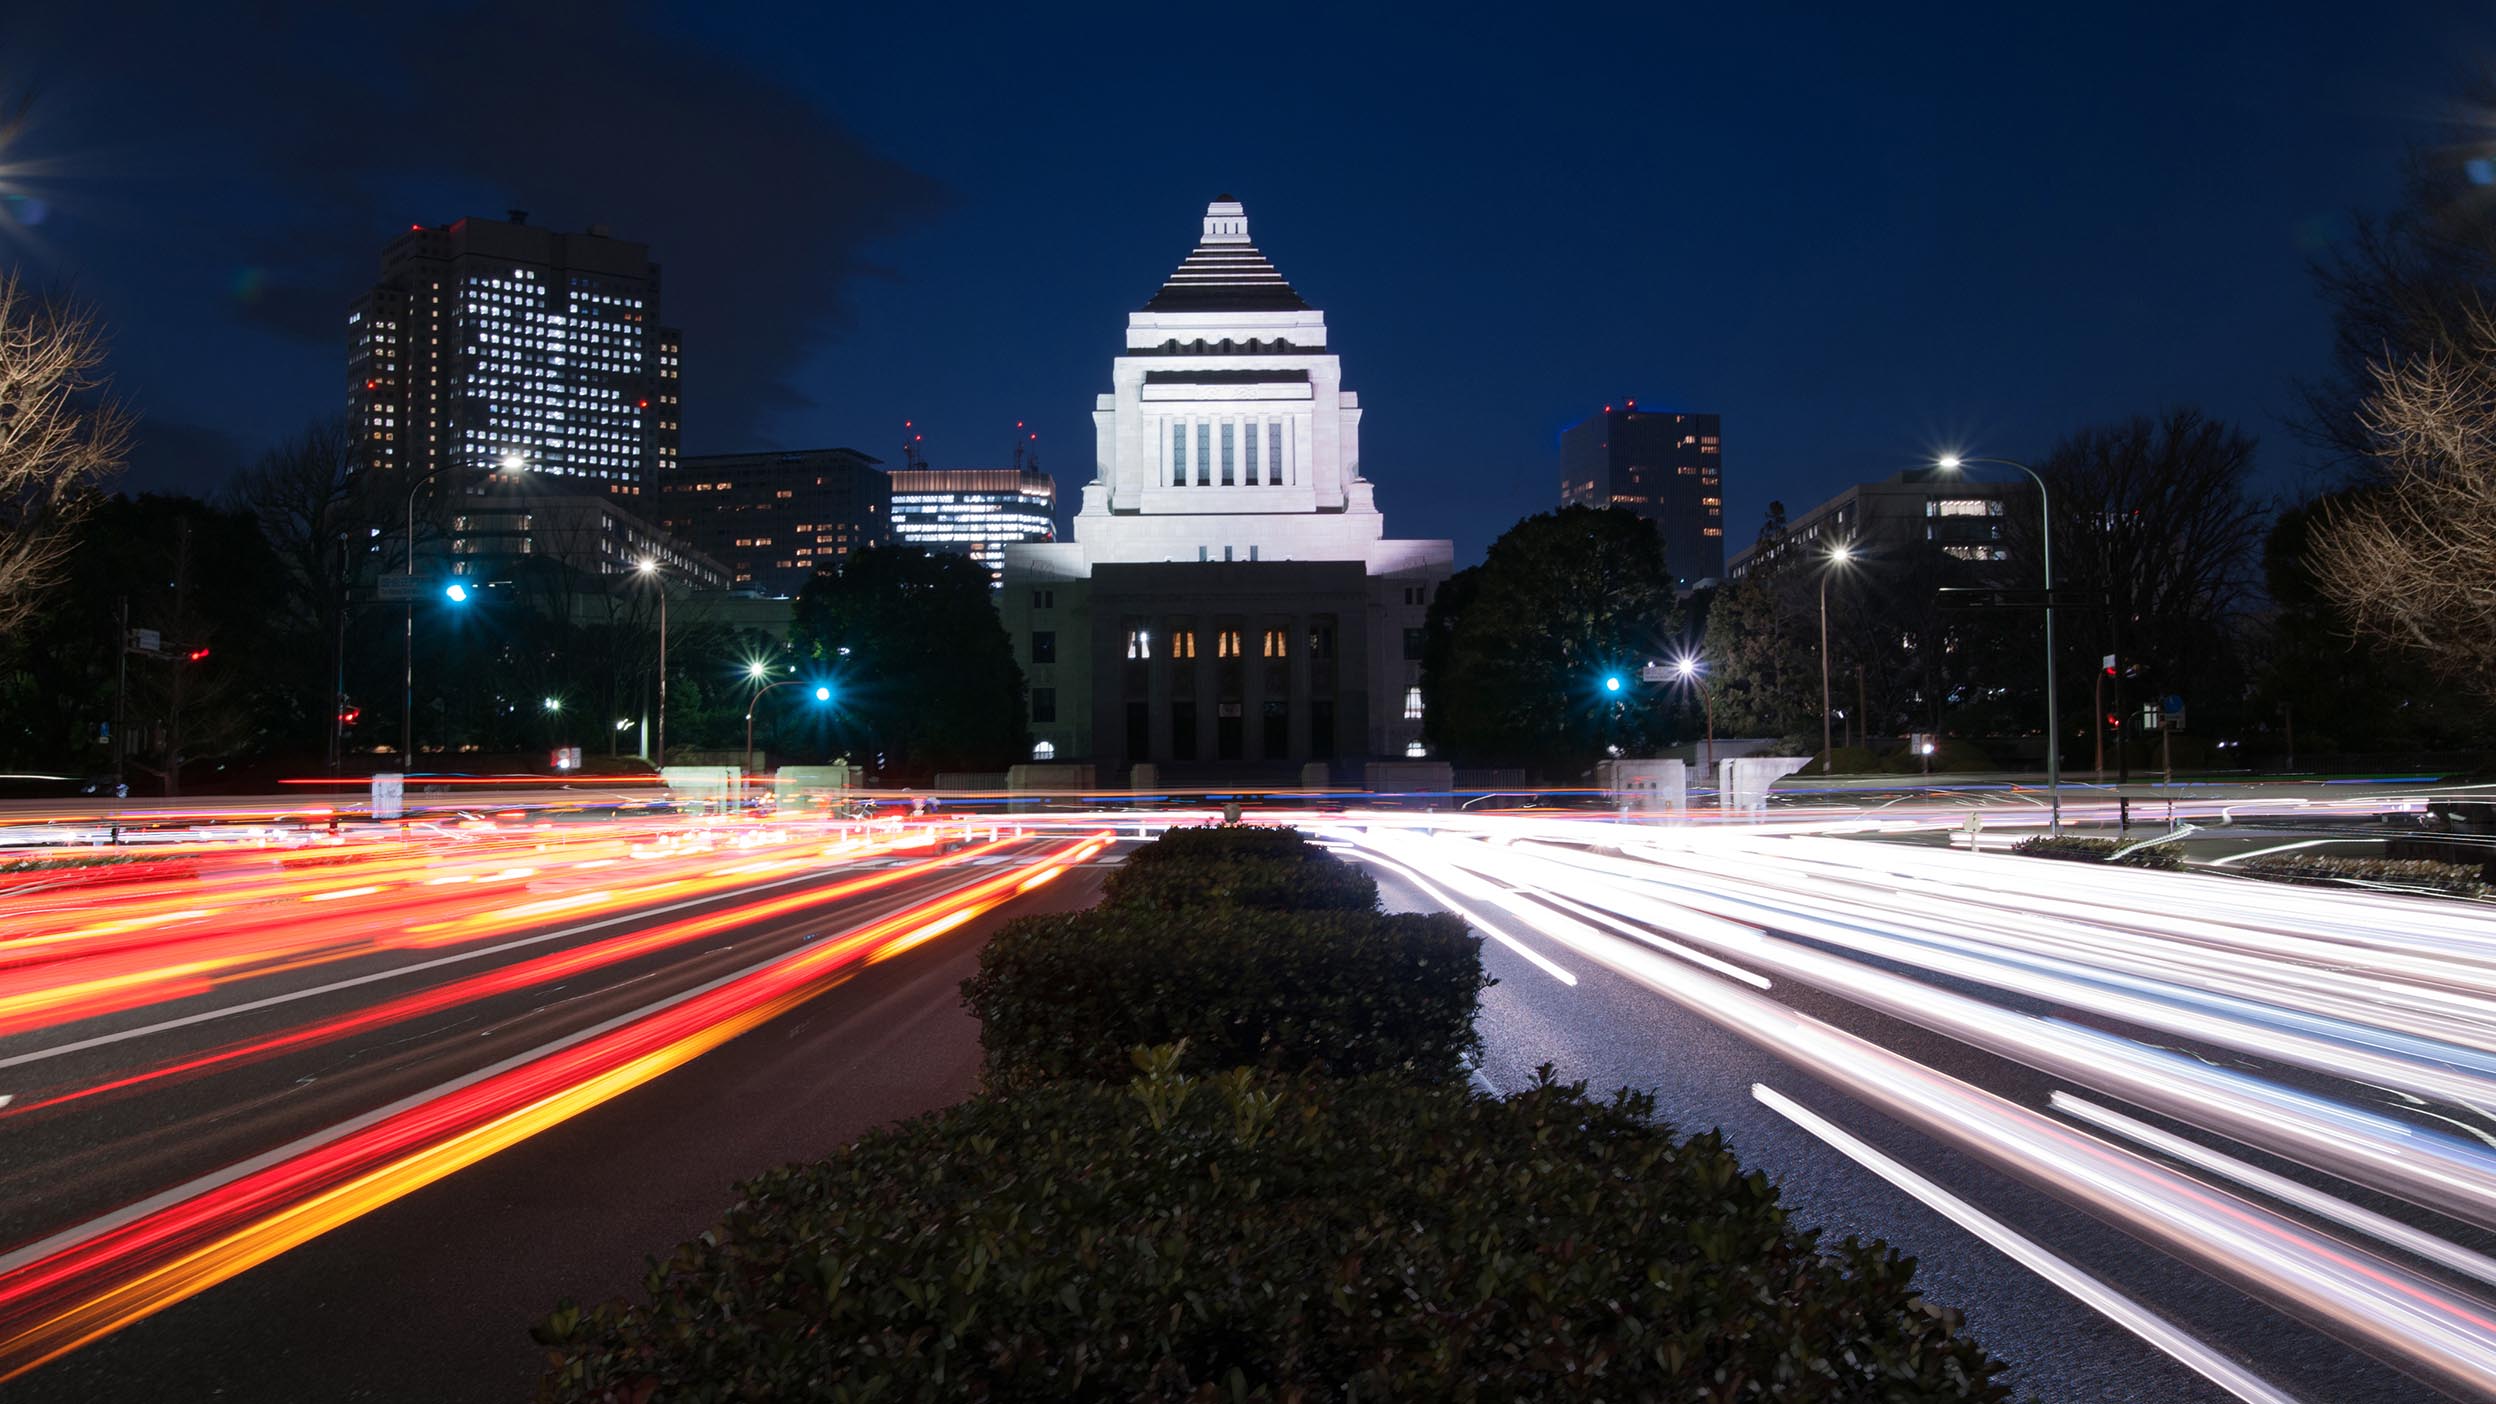 The Parliament house, national diet building in Tokyo, Japan